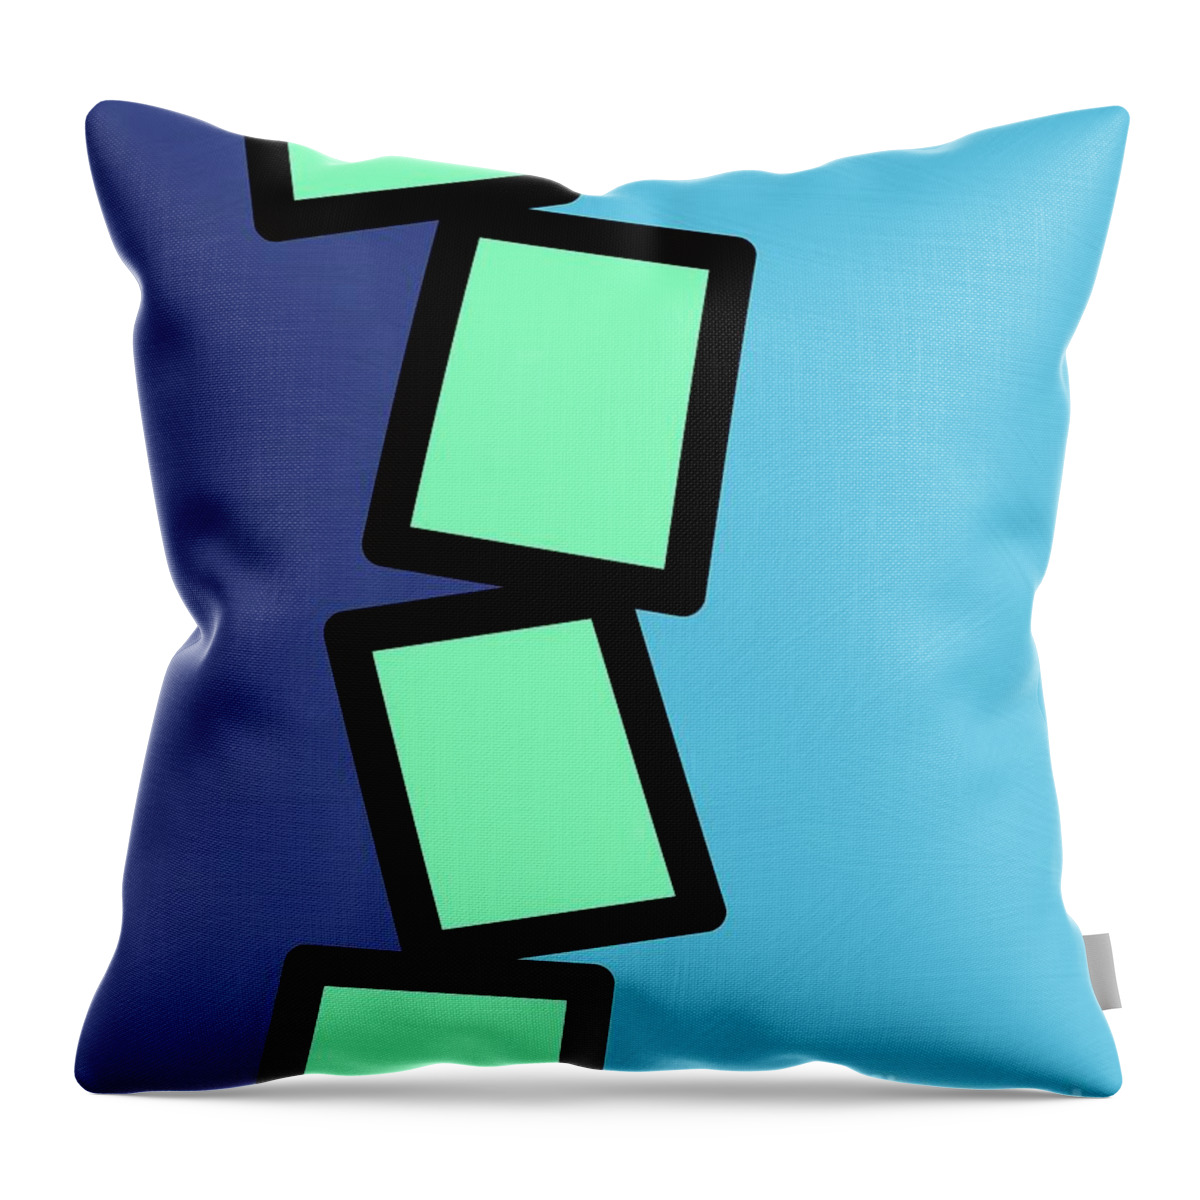 Retro Throw Pillow featuring the mixed media Retro Mint Green Rectangles 2 by Donna Mibus